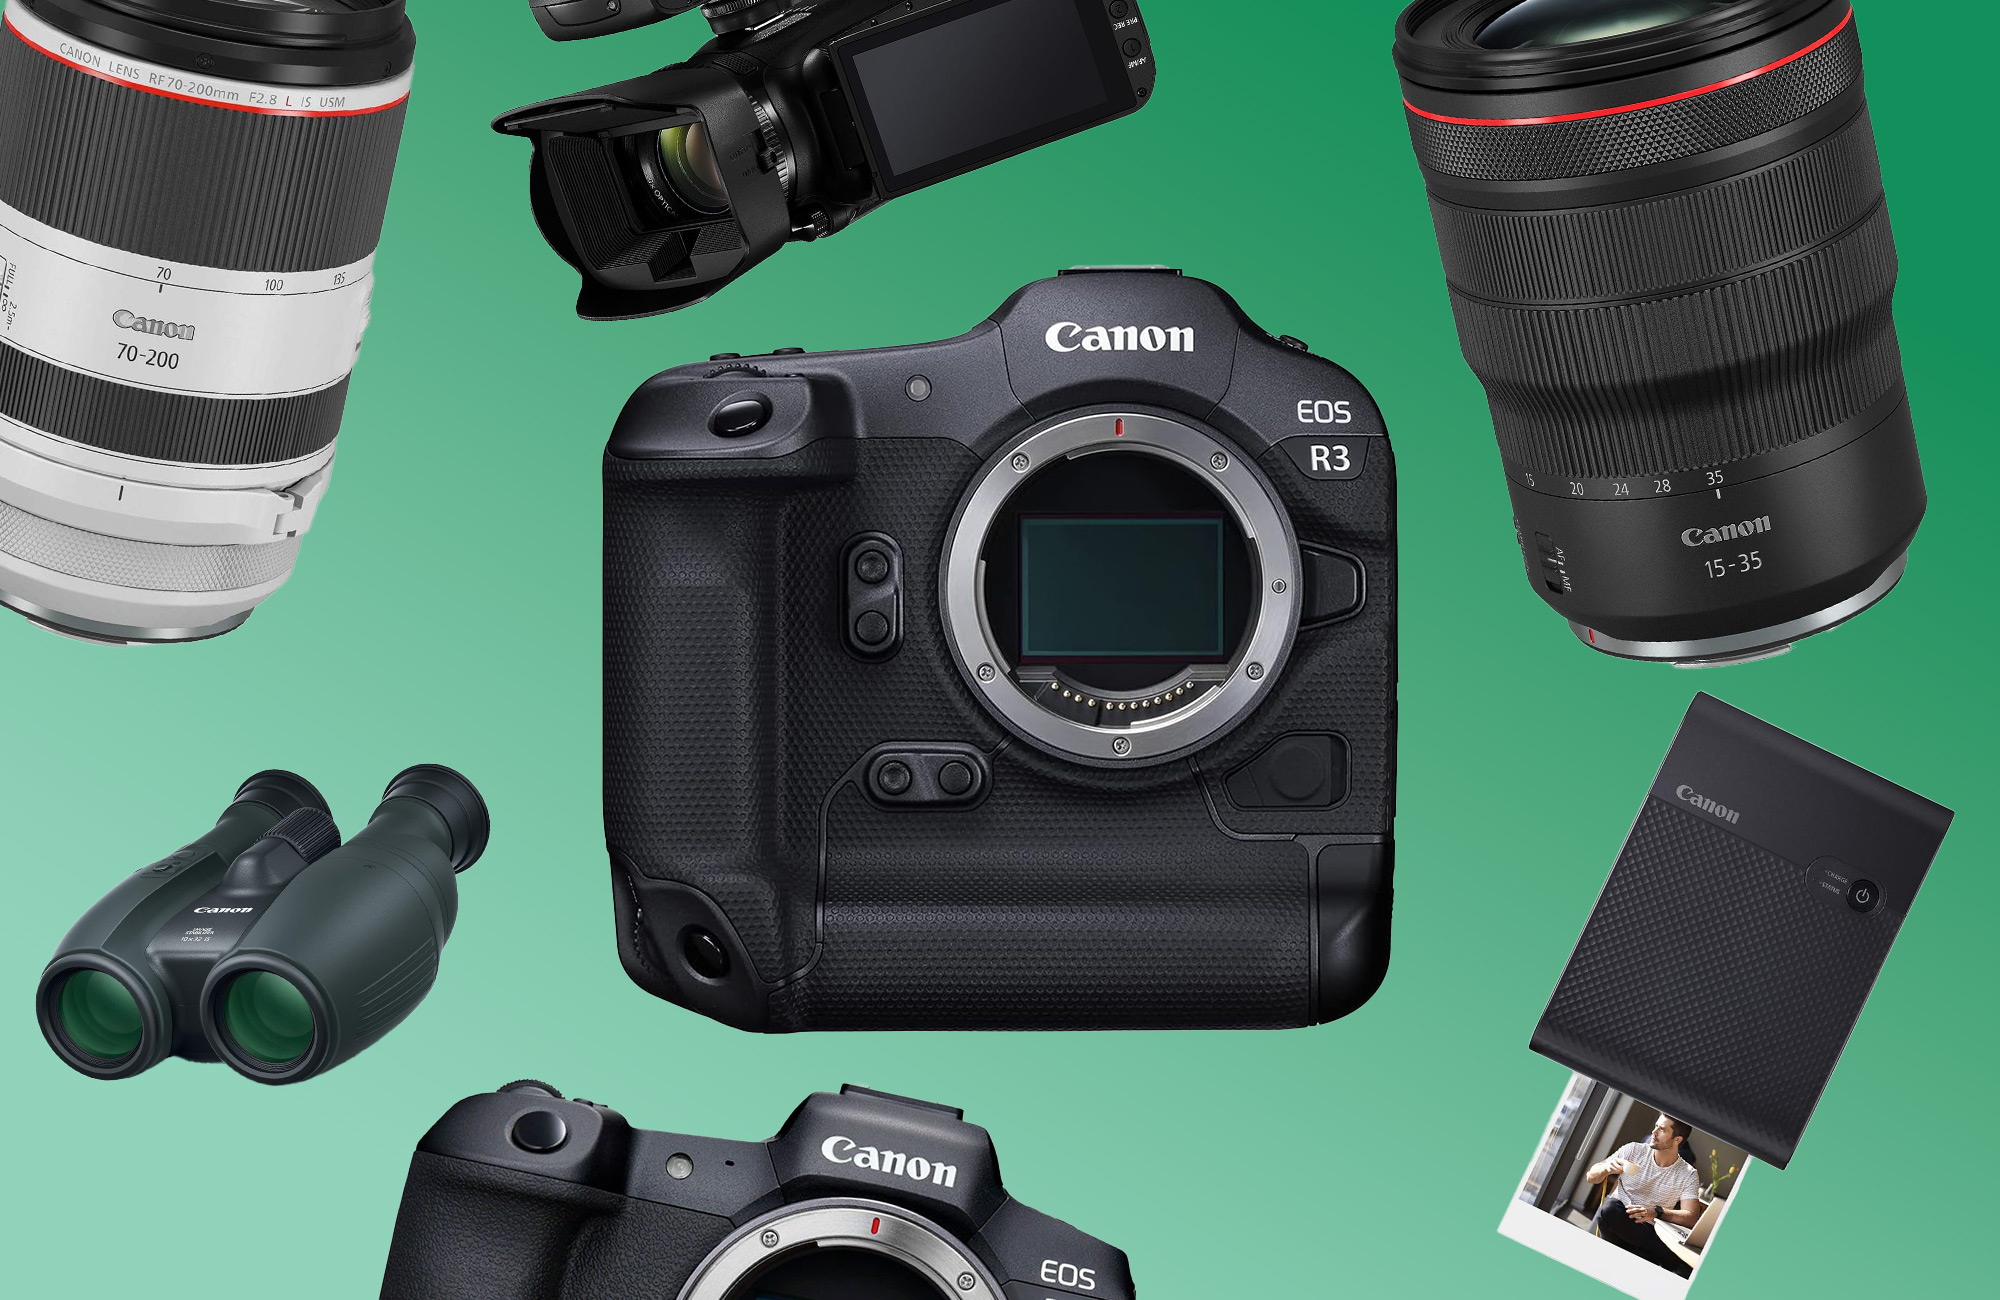 The best Amazon Prime Day deals on Canon gear